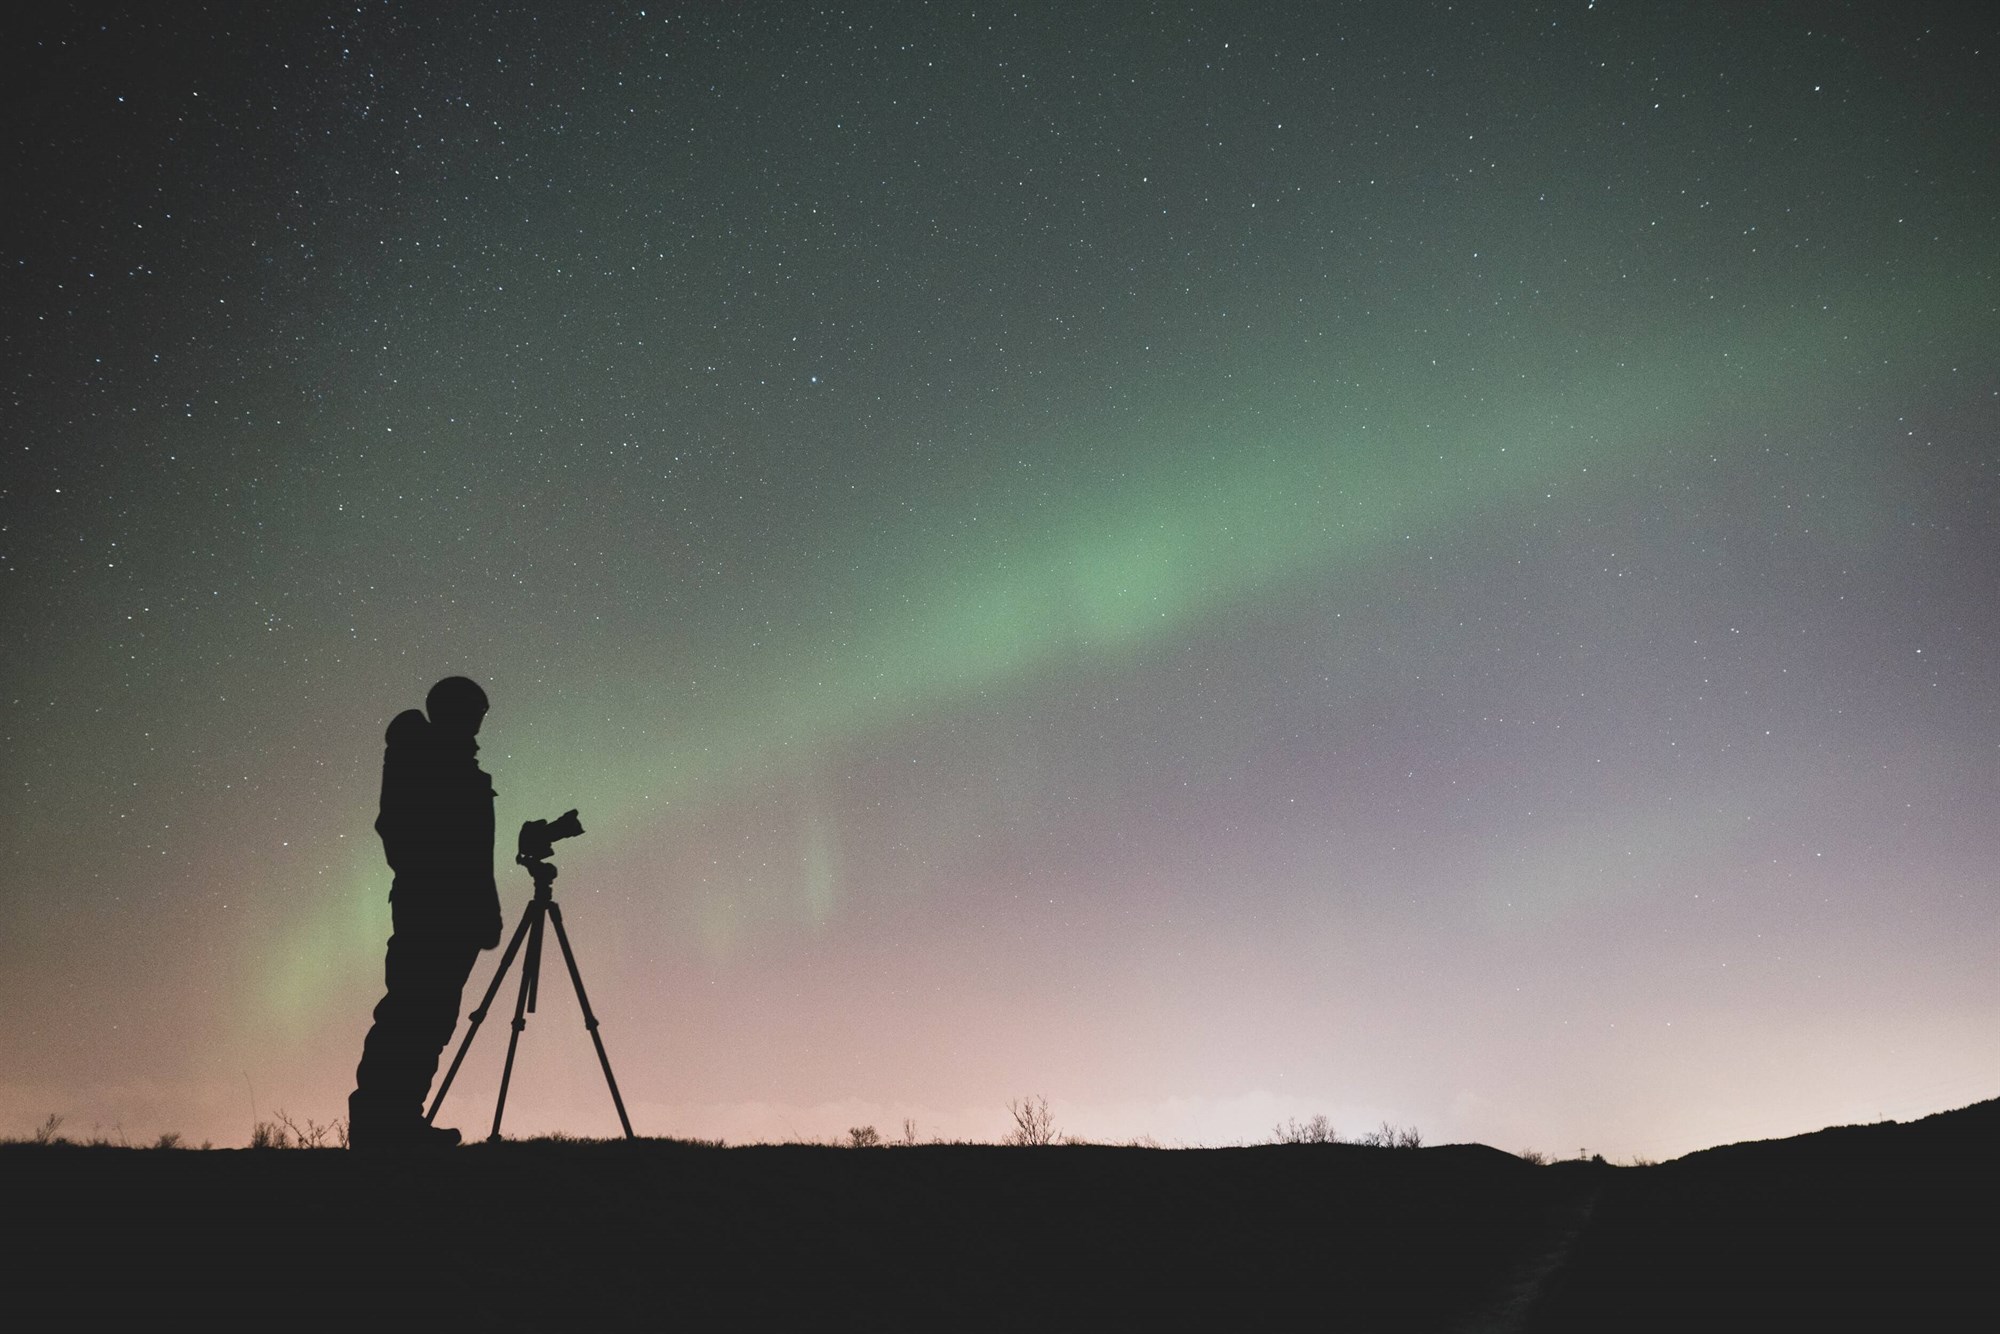 Silhouette of a person with a camera underneath the Northern Lights